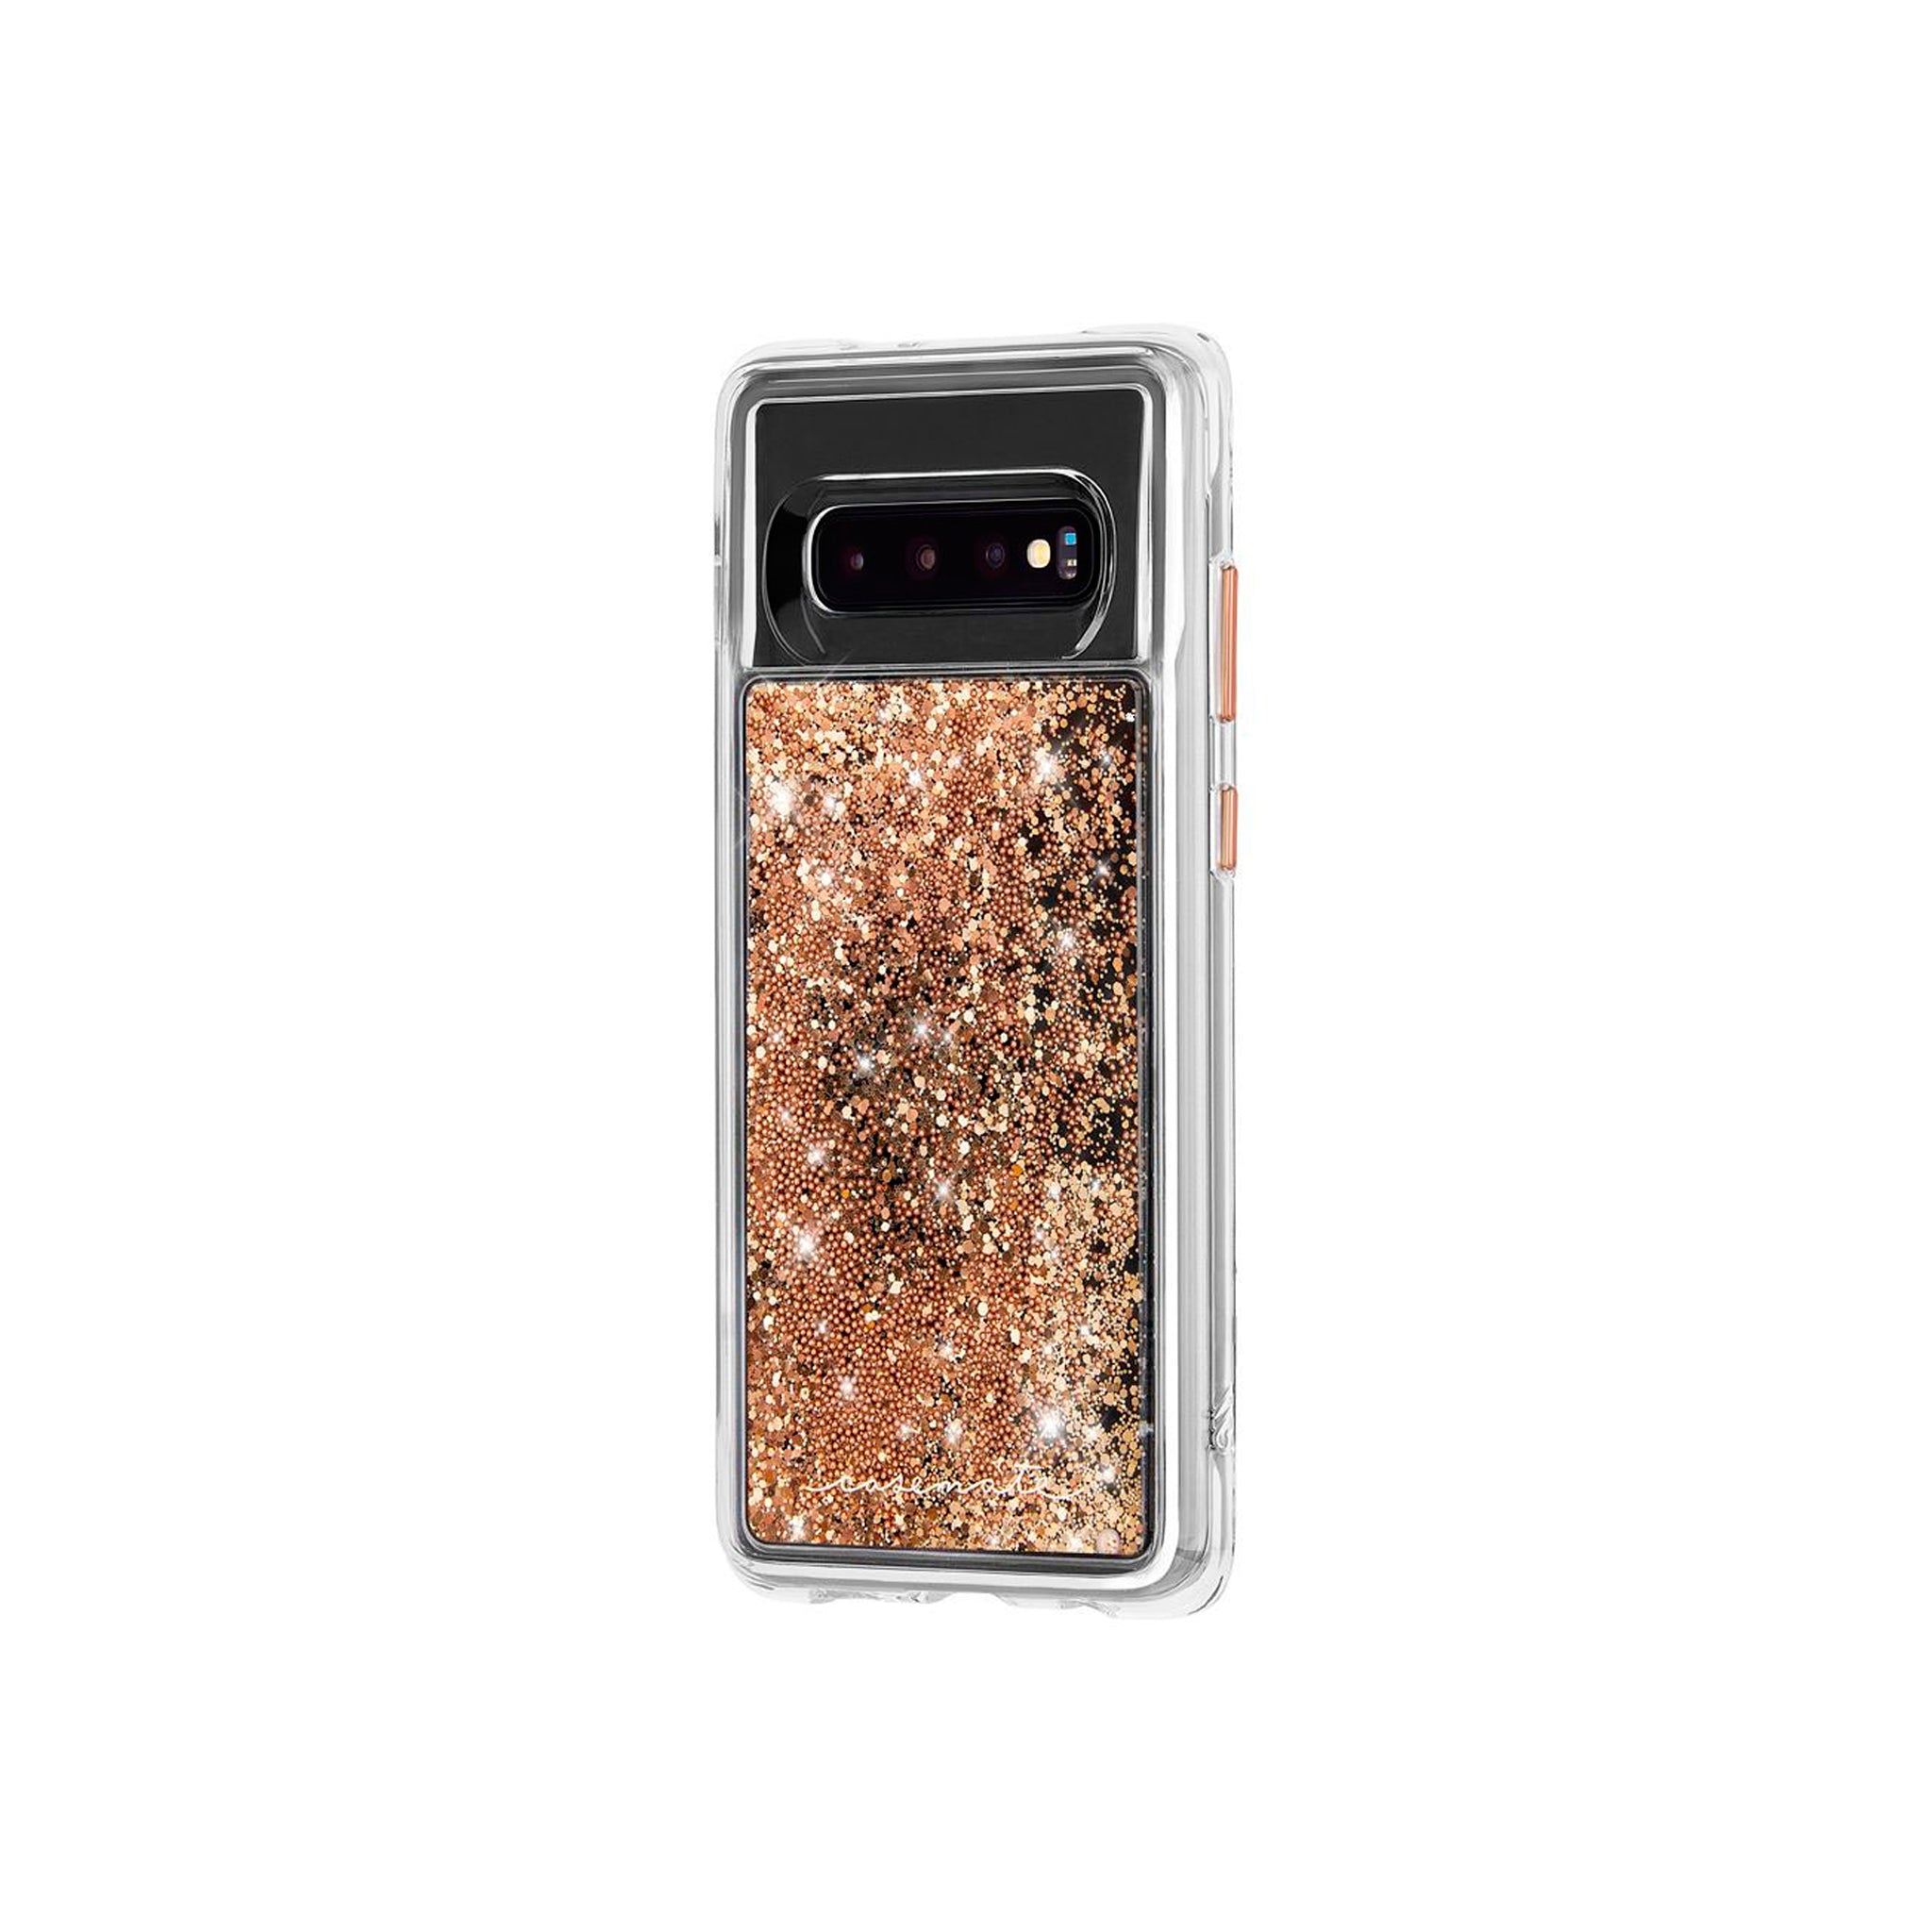 Case-mate - Waterfall Case For Samsung Galaxy S10 - Gold